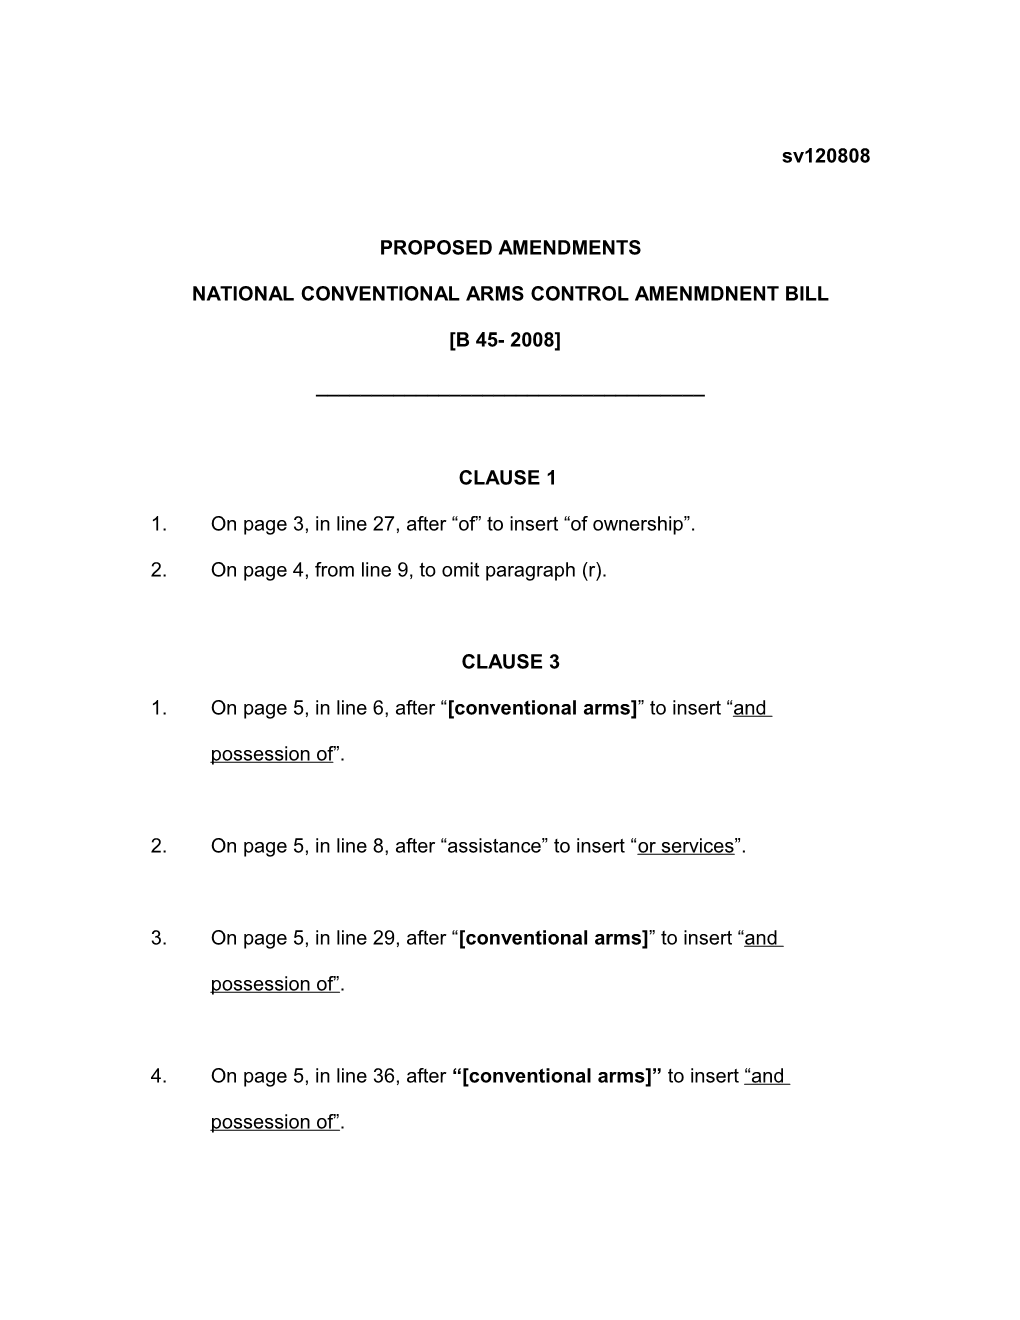 National Conventional Arms Control Amenmdnent Bill